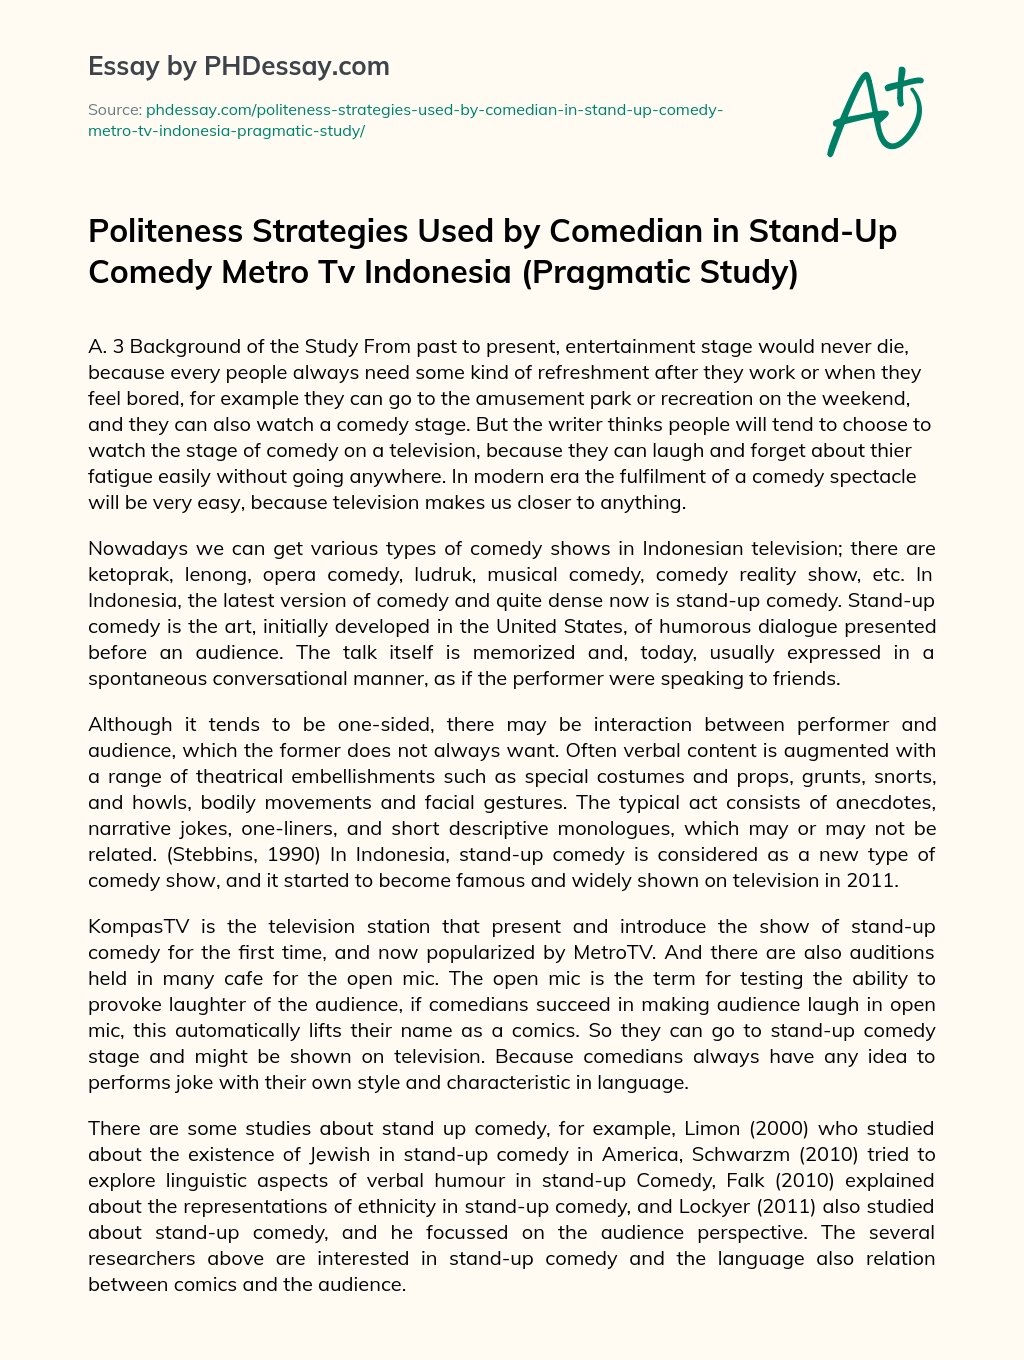 Politeness Strategies Used by Comedian essay